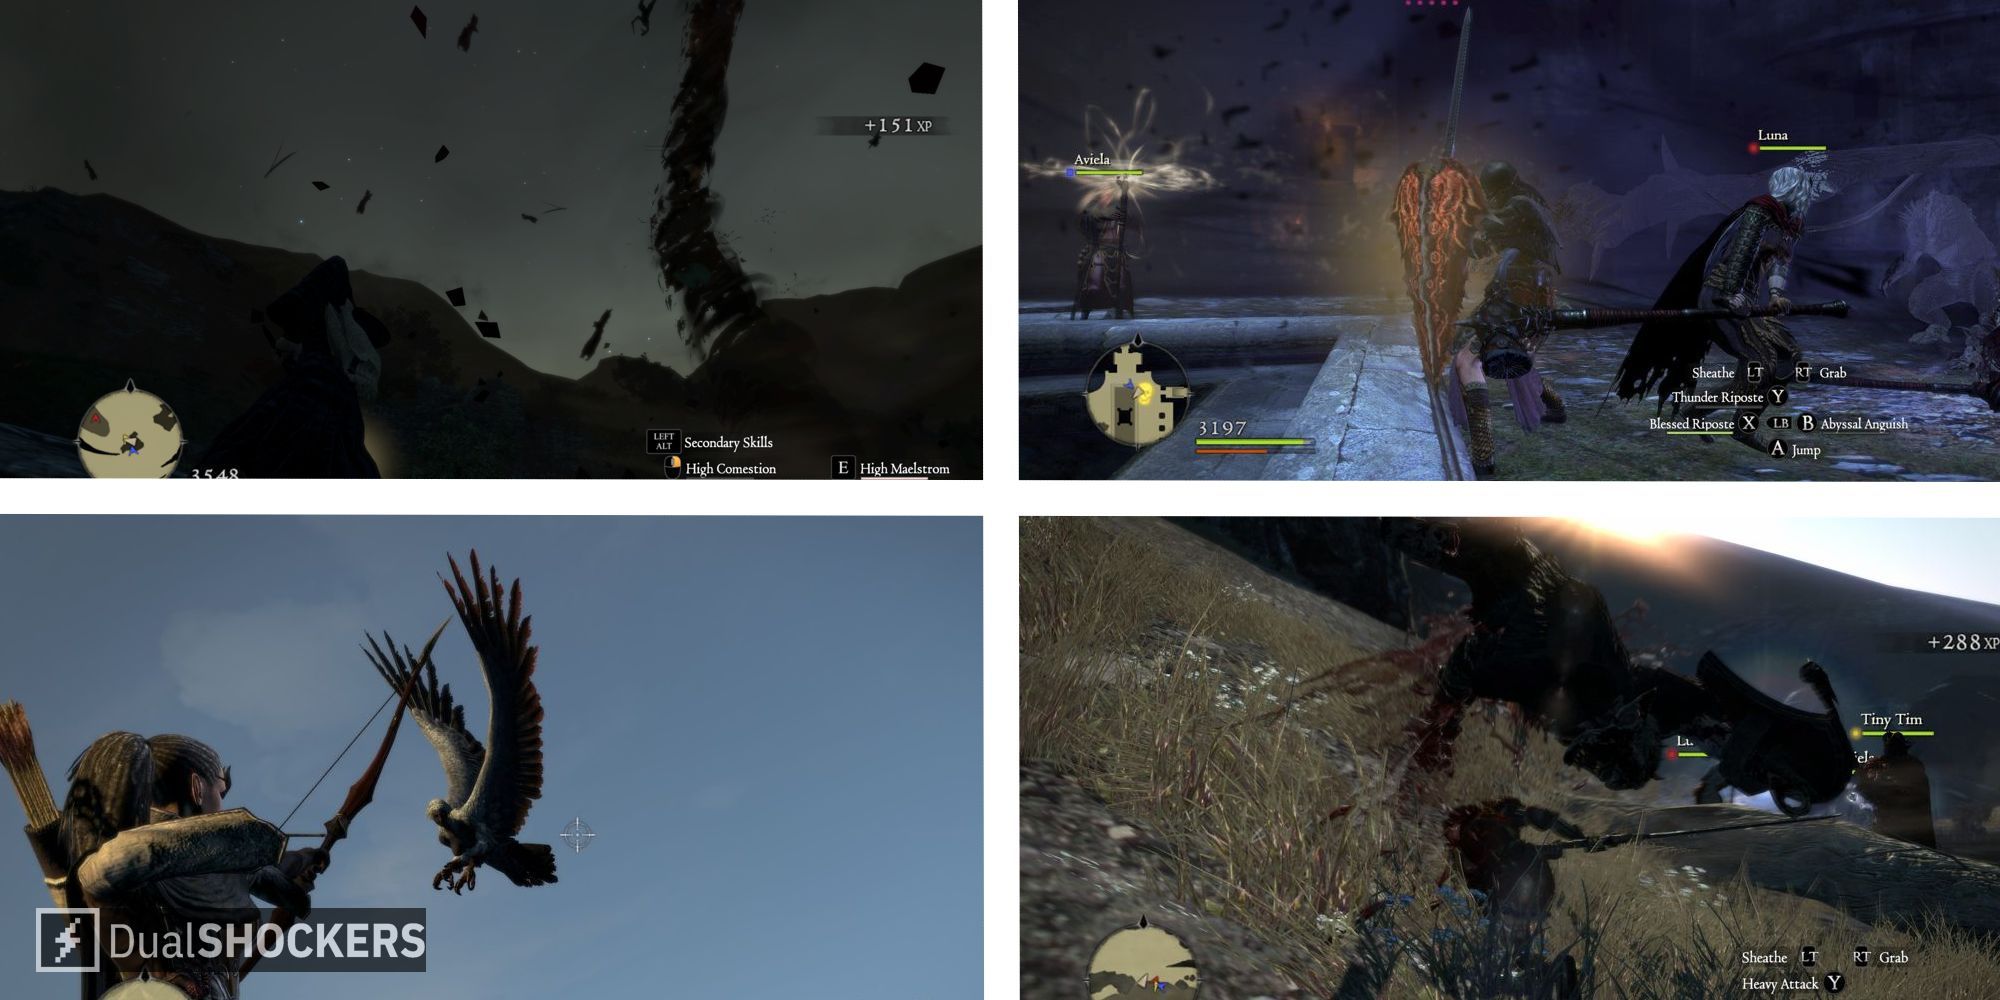 Dragon's Dogma split image four different vocations using their skills in combat